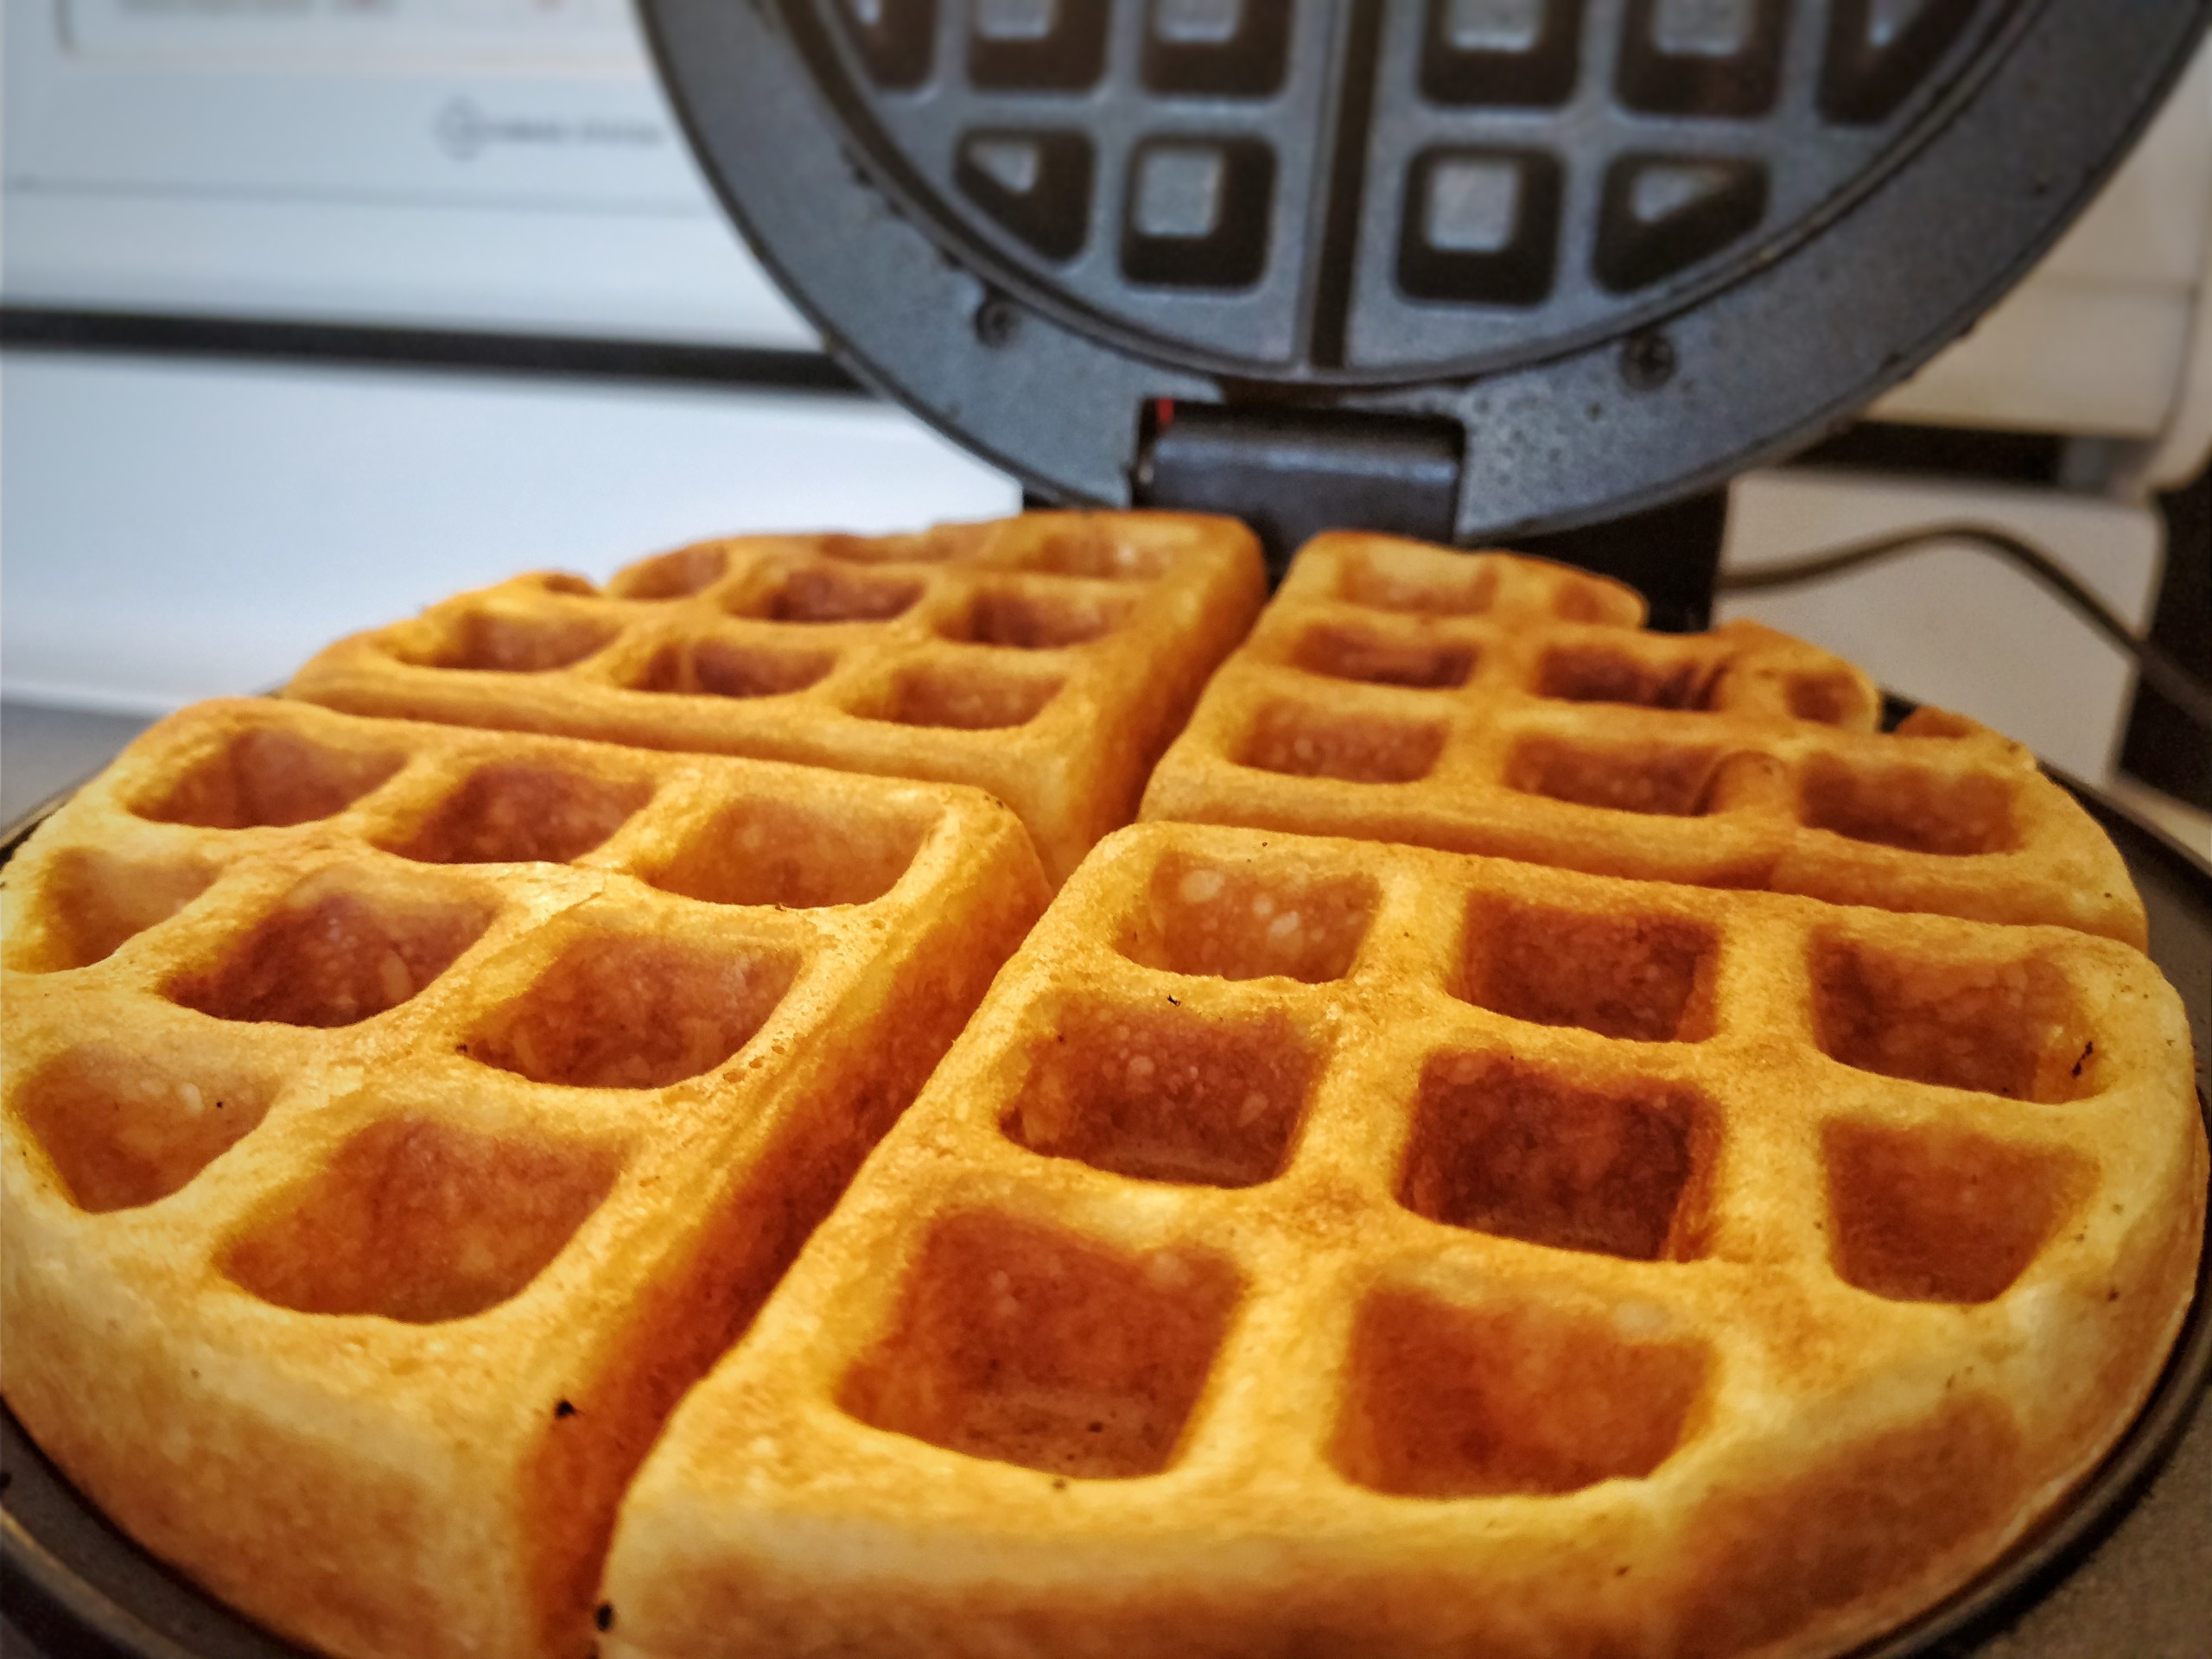 Fresh cooked waffle in the open waffle iron.